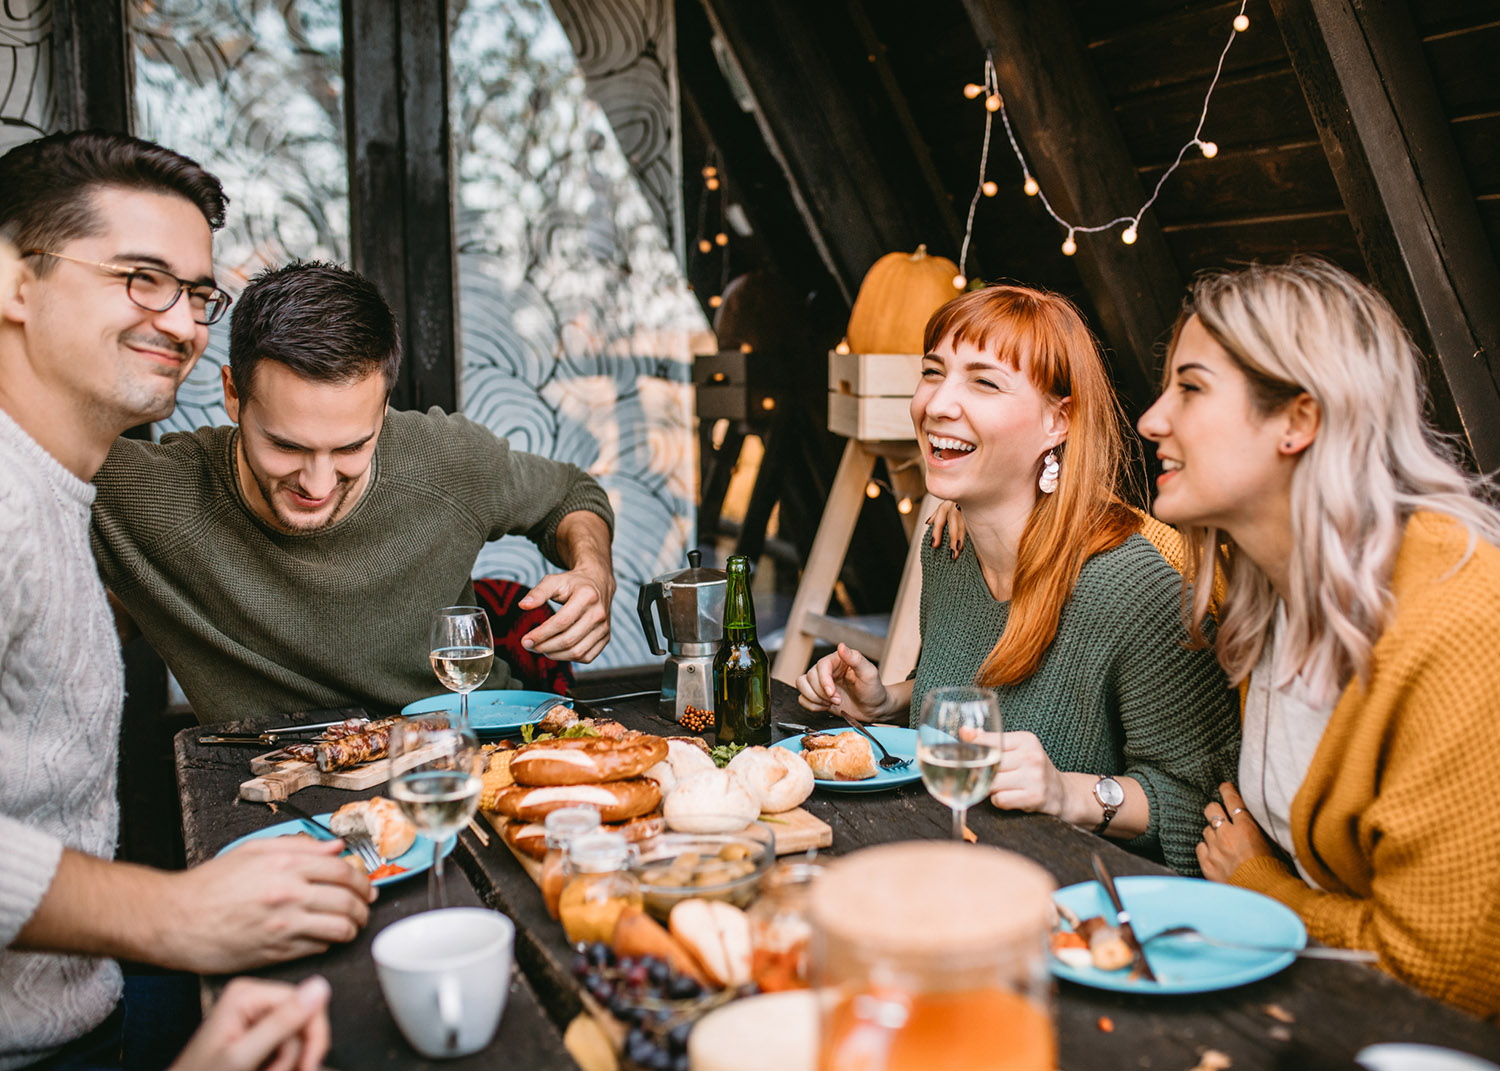 Group of smiling friends enjoys food and conversation at autumn picnic at weekend house